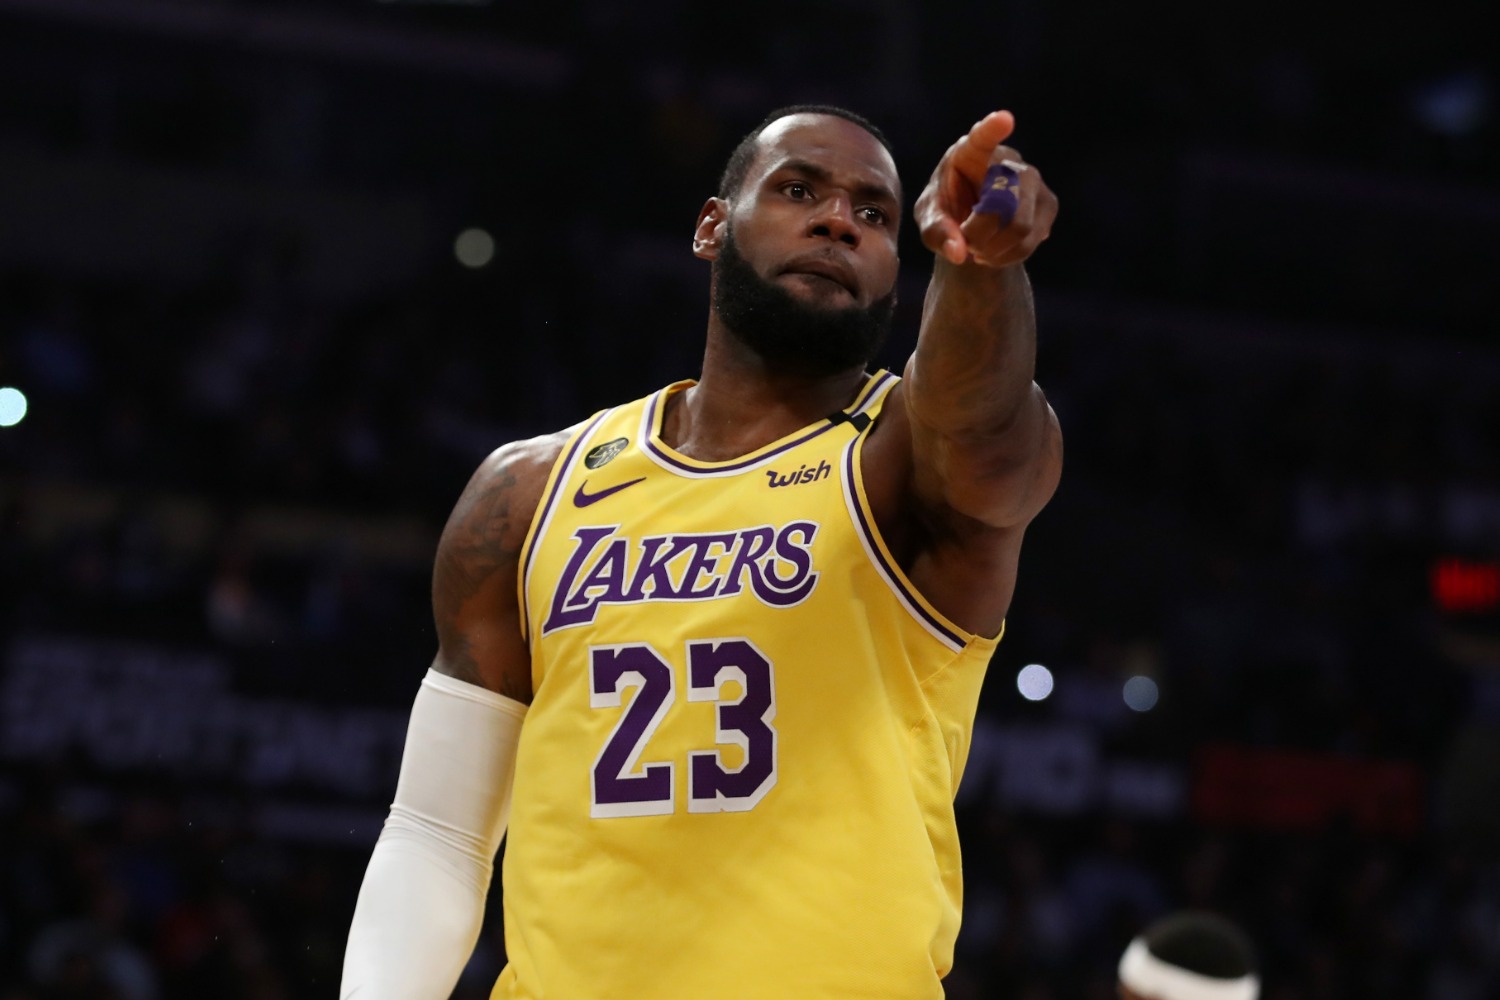 Lakers GM Rob Pelinka just sent a terrifying message about LeBron James and his playoff mentality.